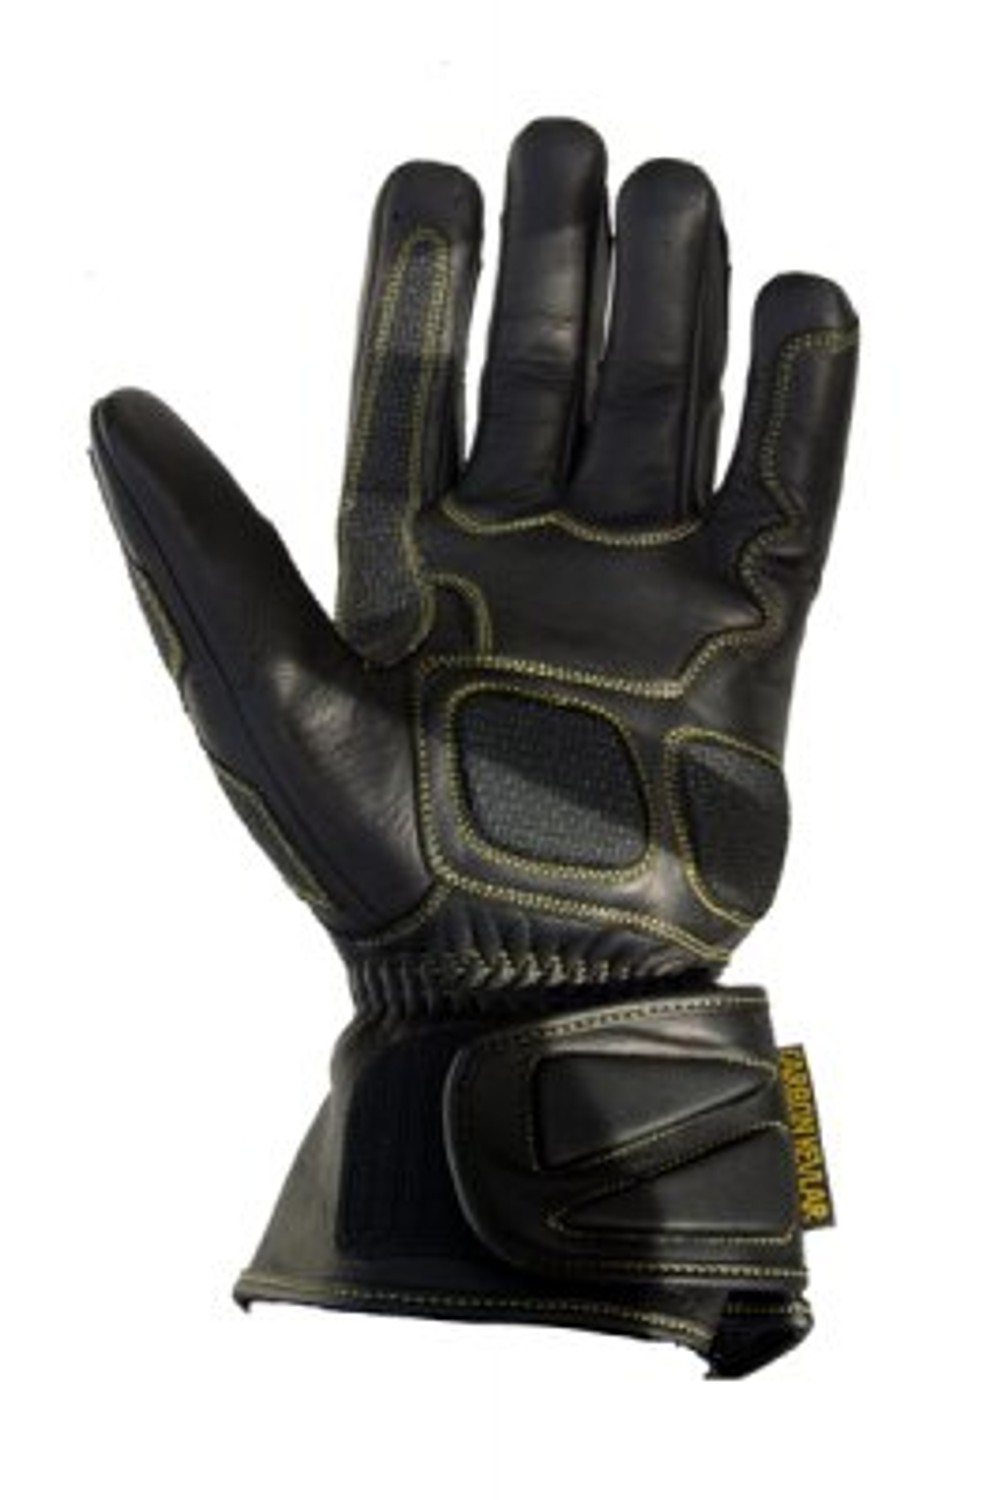 R&G Racing Deluxe Leather Motorcycle Gloves Size Medium 